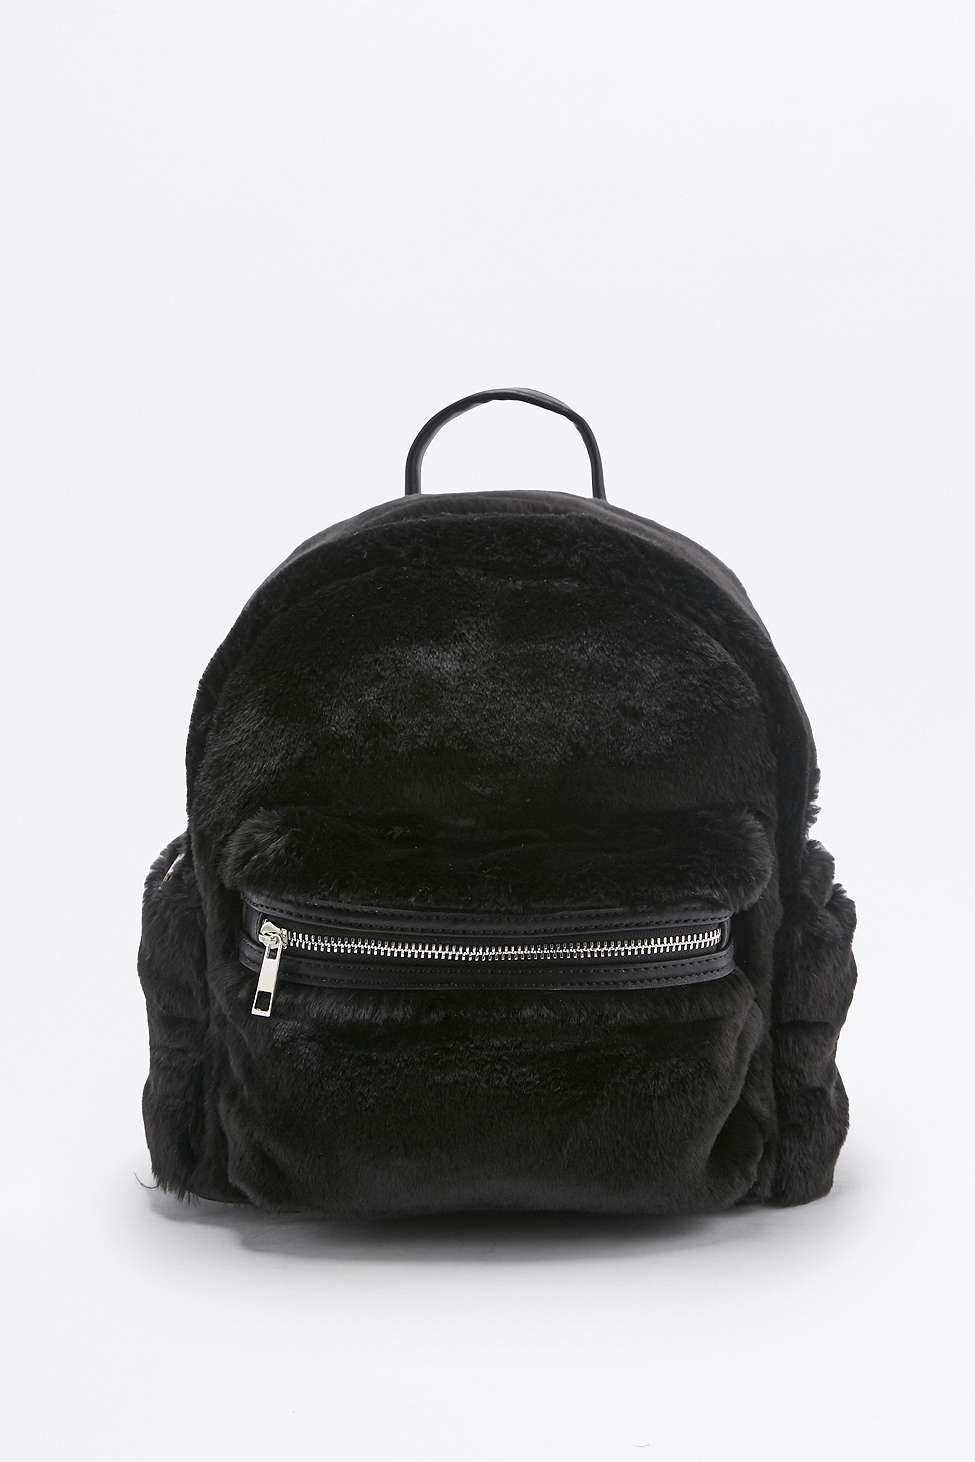 Lyst - Urban Outfitters Faux-fur Mini Backpack in Black